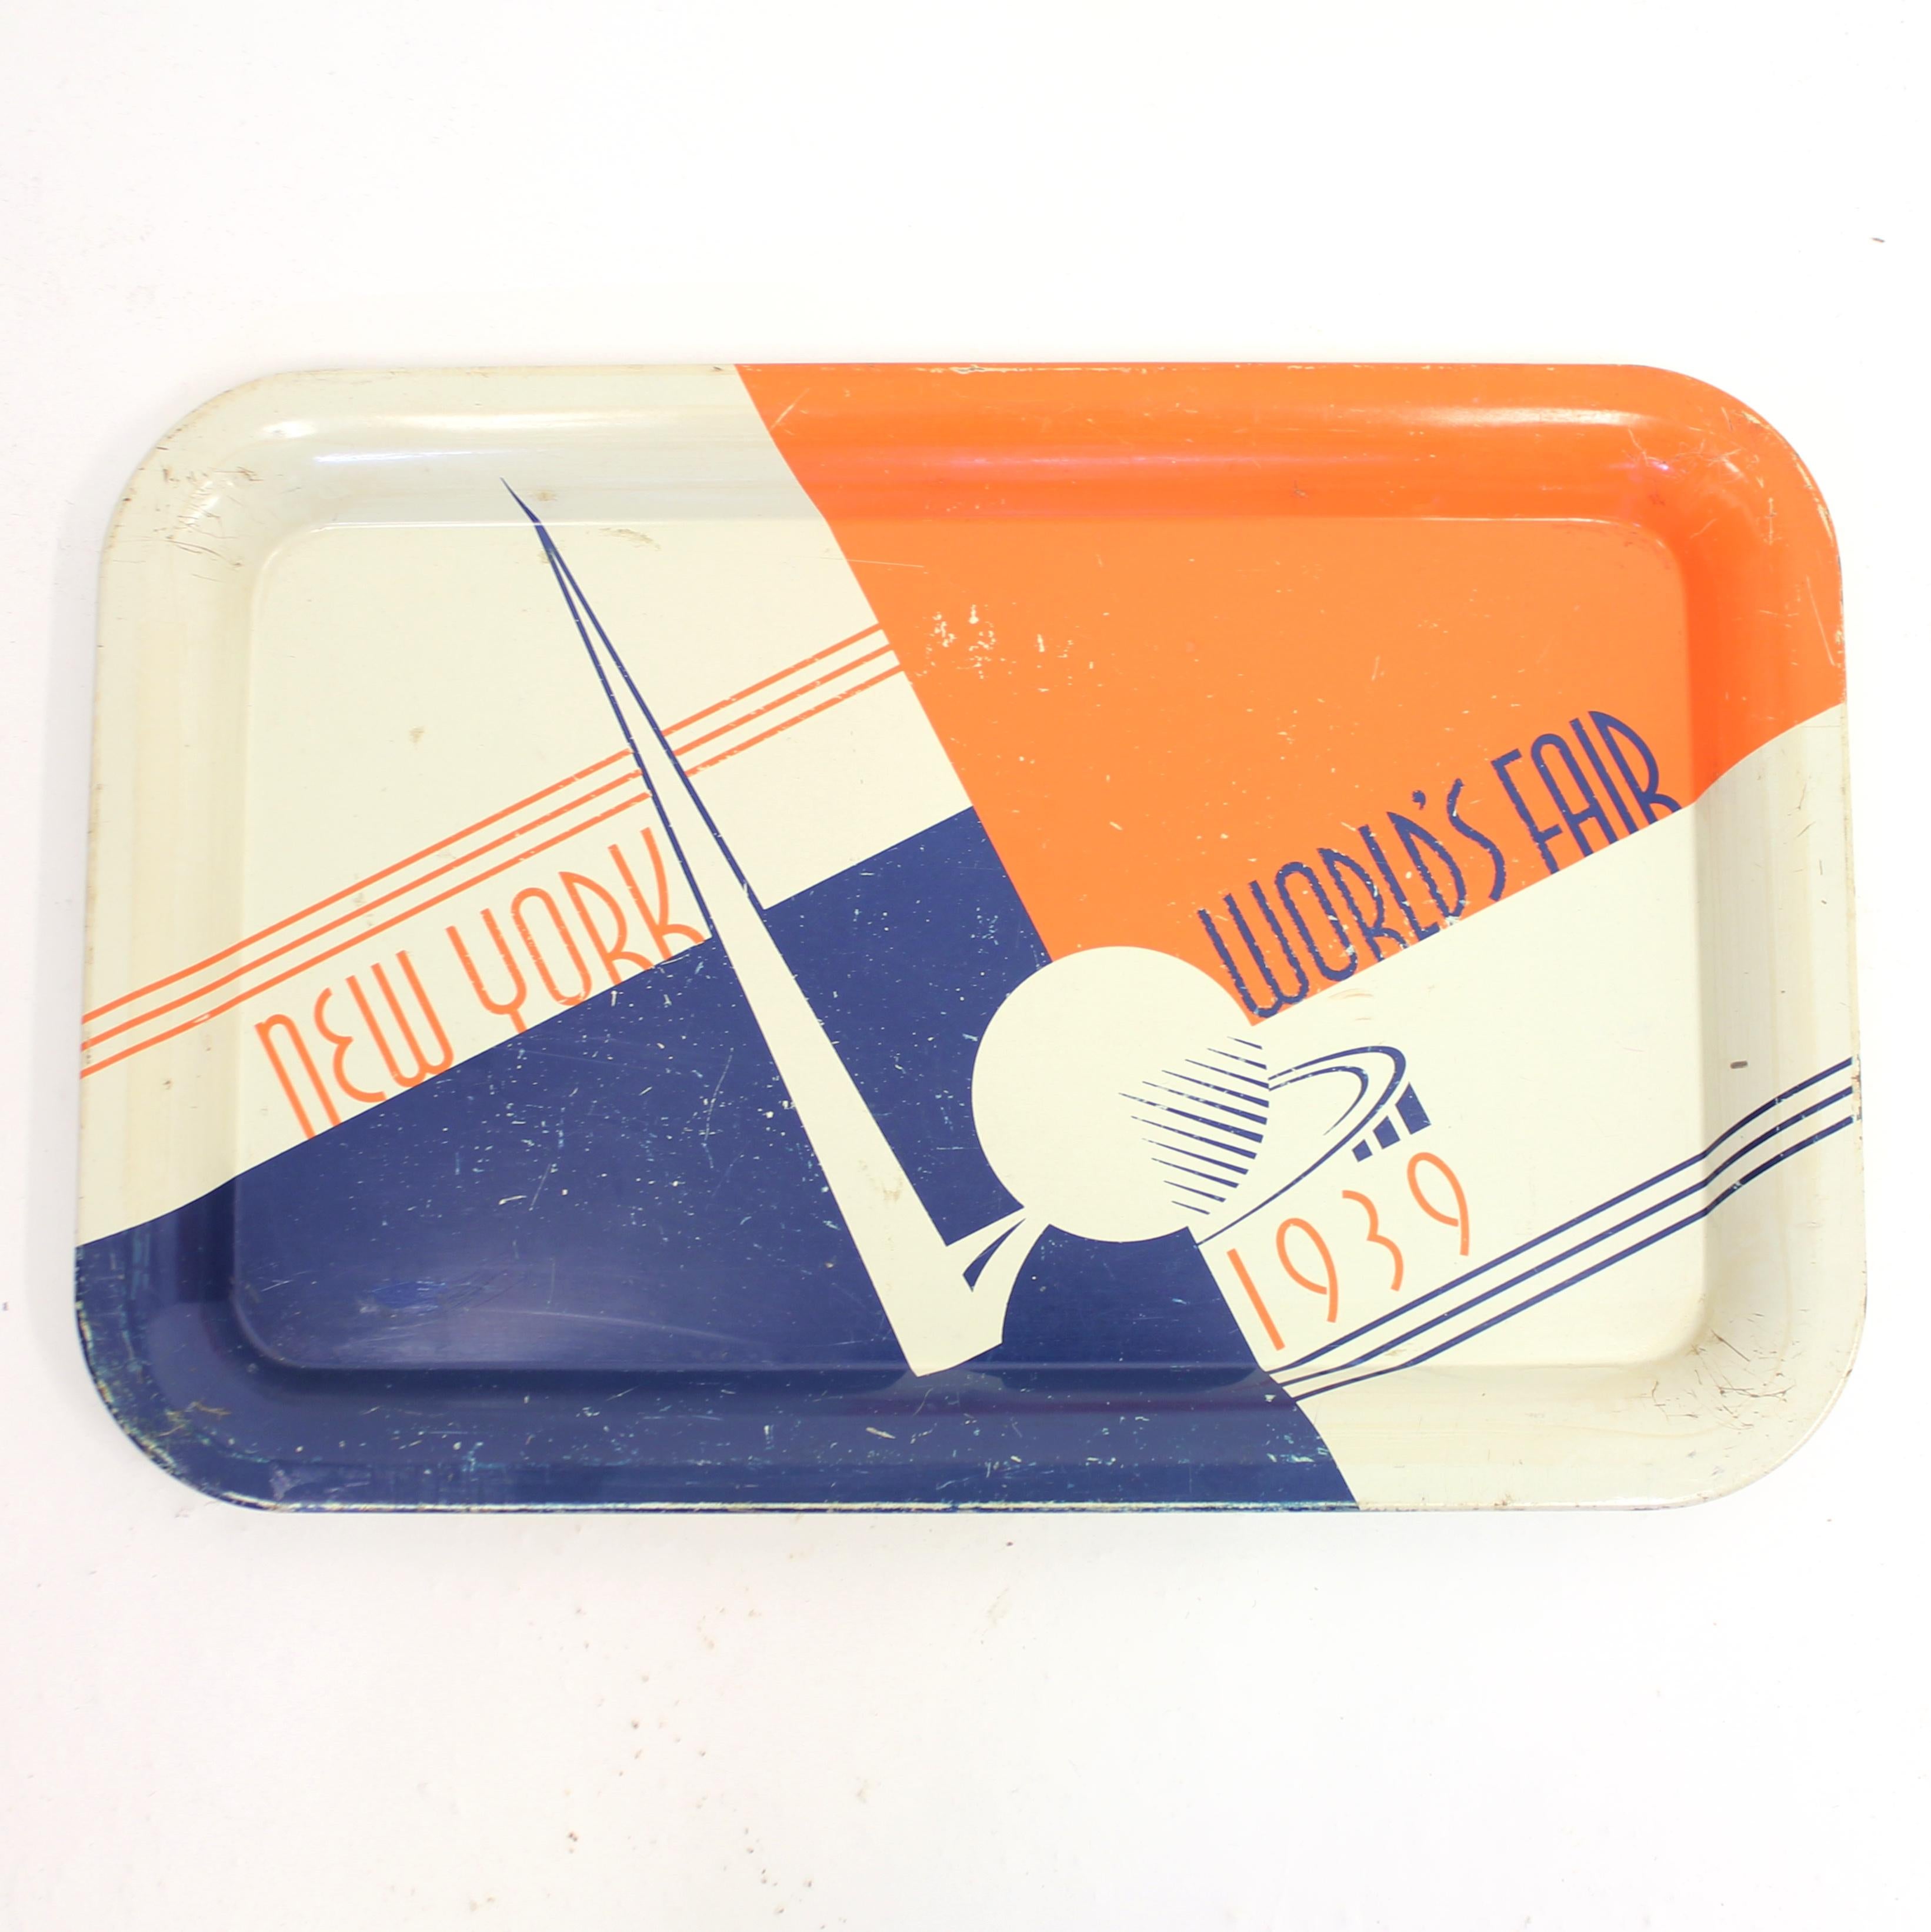 Rare Art Deco sheet metal tray in dark blue, orange and cream white from the very famous New York World's Fair 1939. The front side with a few scratches and marks from normal use, backside with a bit of light rust and missing paint but over all in a